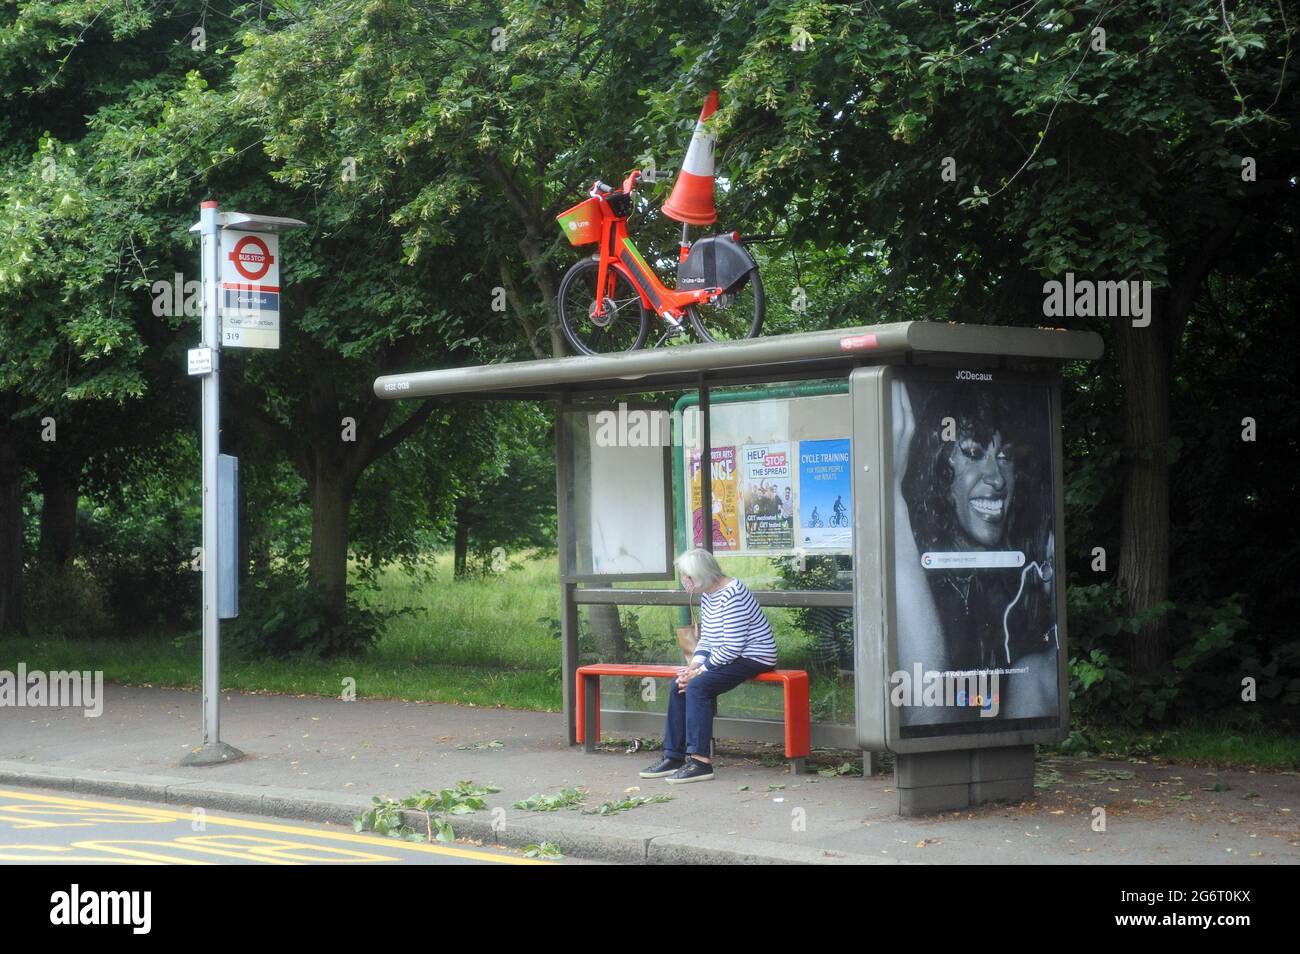 London, UK. 8th July, 2021. Lime rental Bike left on bus stand at Wandsworth Common after night of Euro football win celebrations after England beat Denmark at Wembley. Credit: JOHNNY ARMSTEAD/Alamy Live News Stock Photo